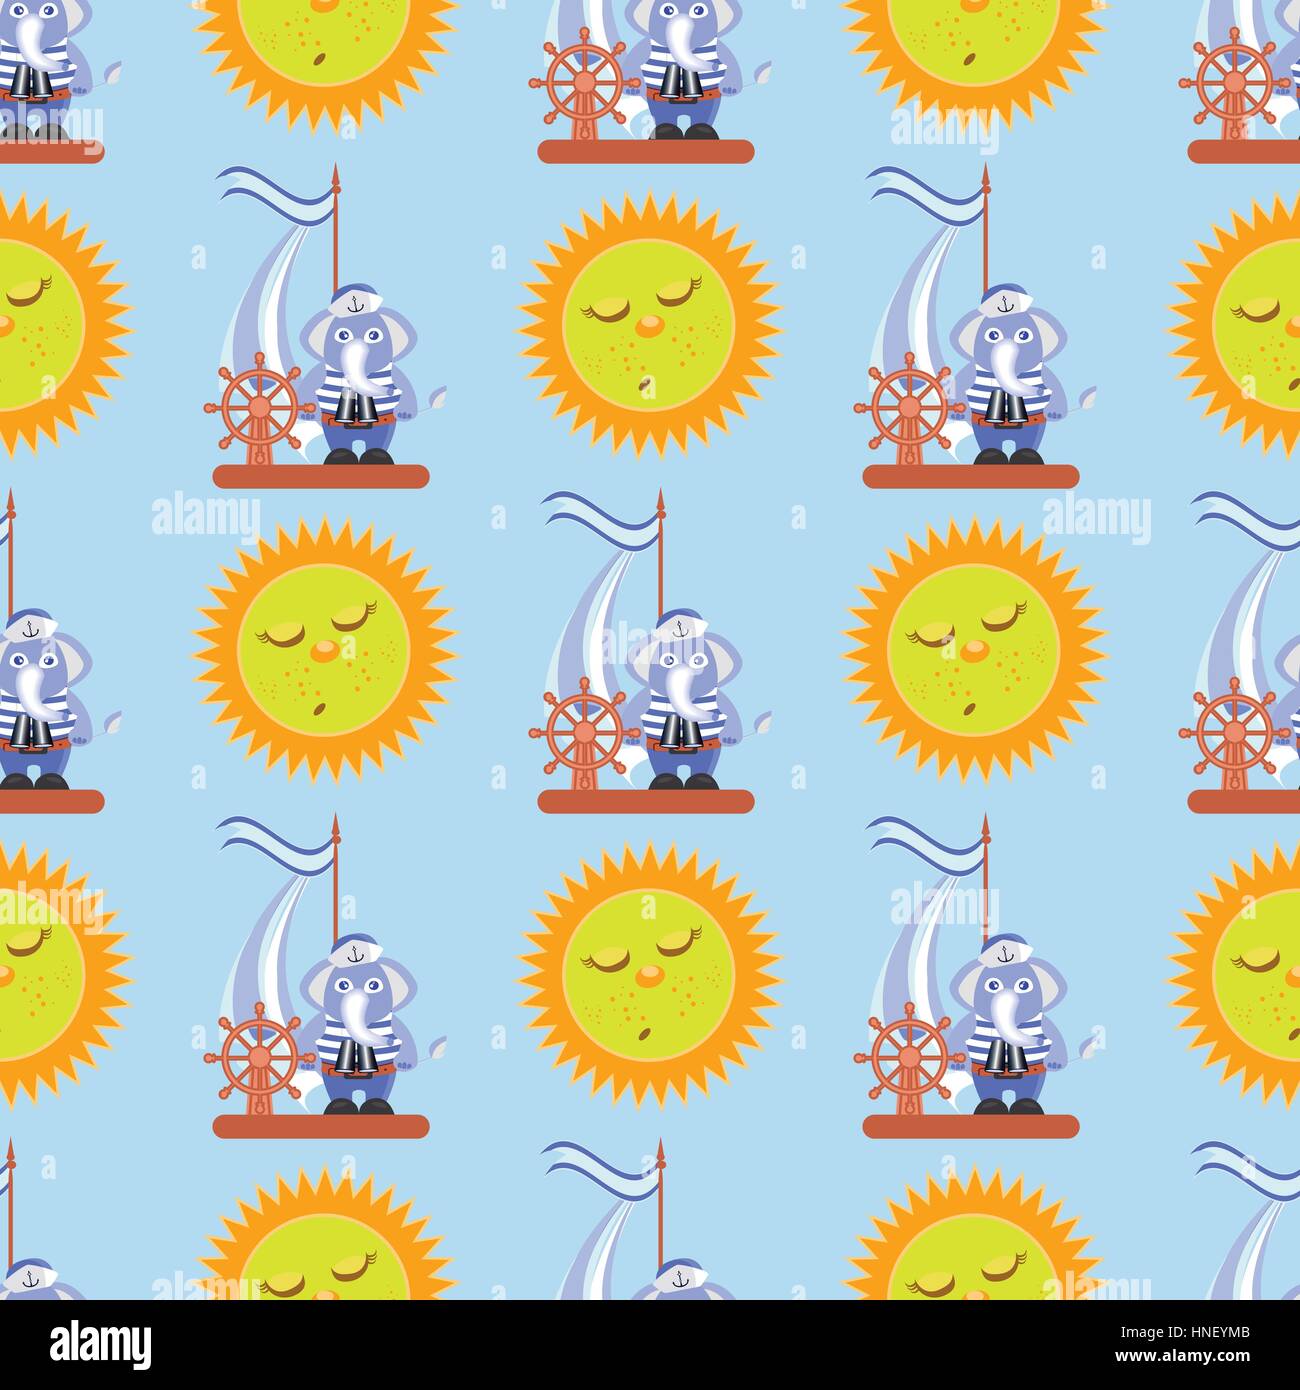 the sun and sleeping elephant. seamless pattern. children s illustration. used for printing, the website, Smart Phone, design etc Stock Vector